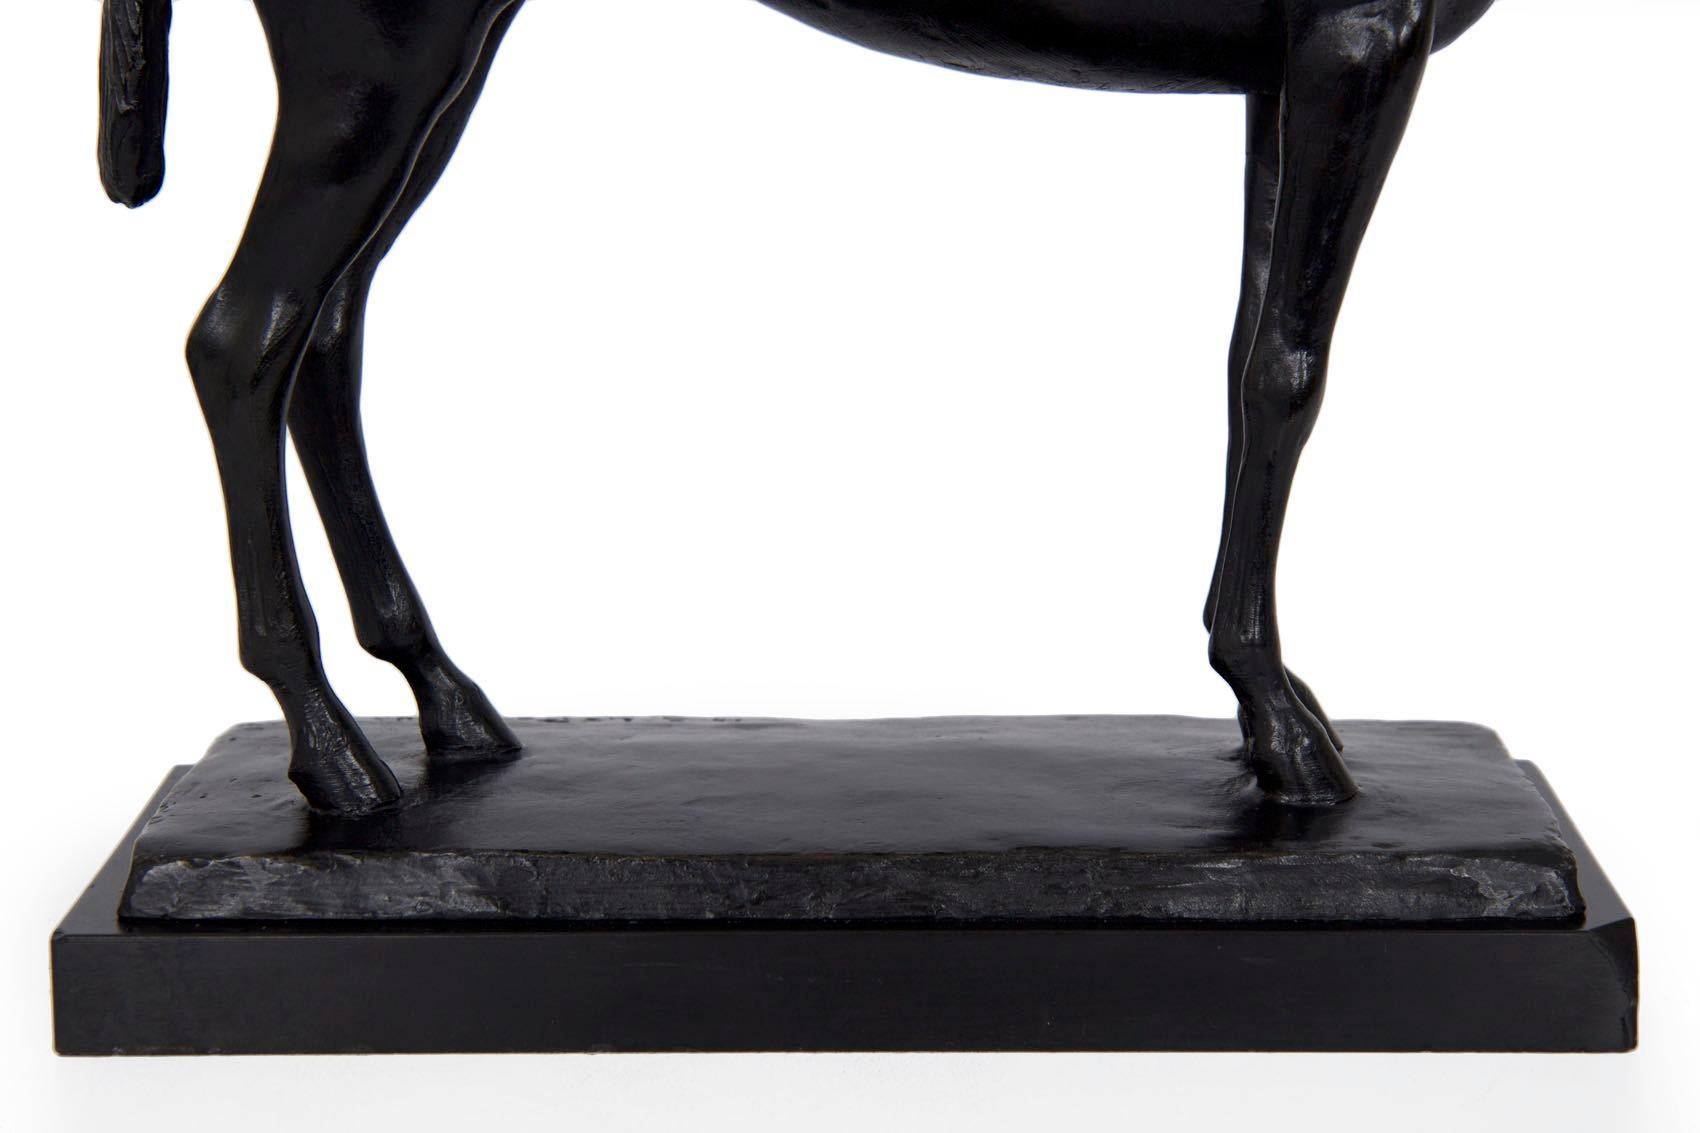 American Antique Sculpture of “Standing Horse” by Mary La BoyTeaux & Roman Bronze Works